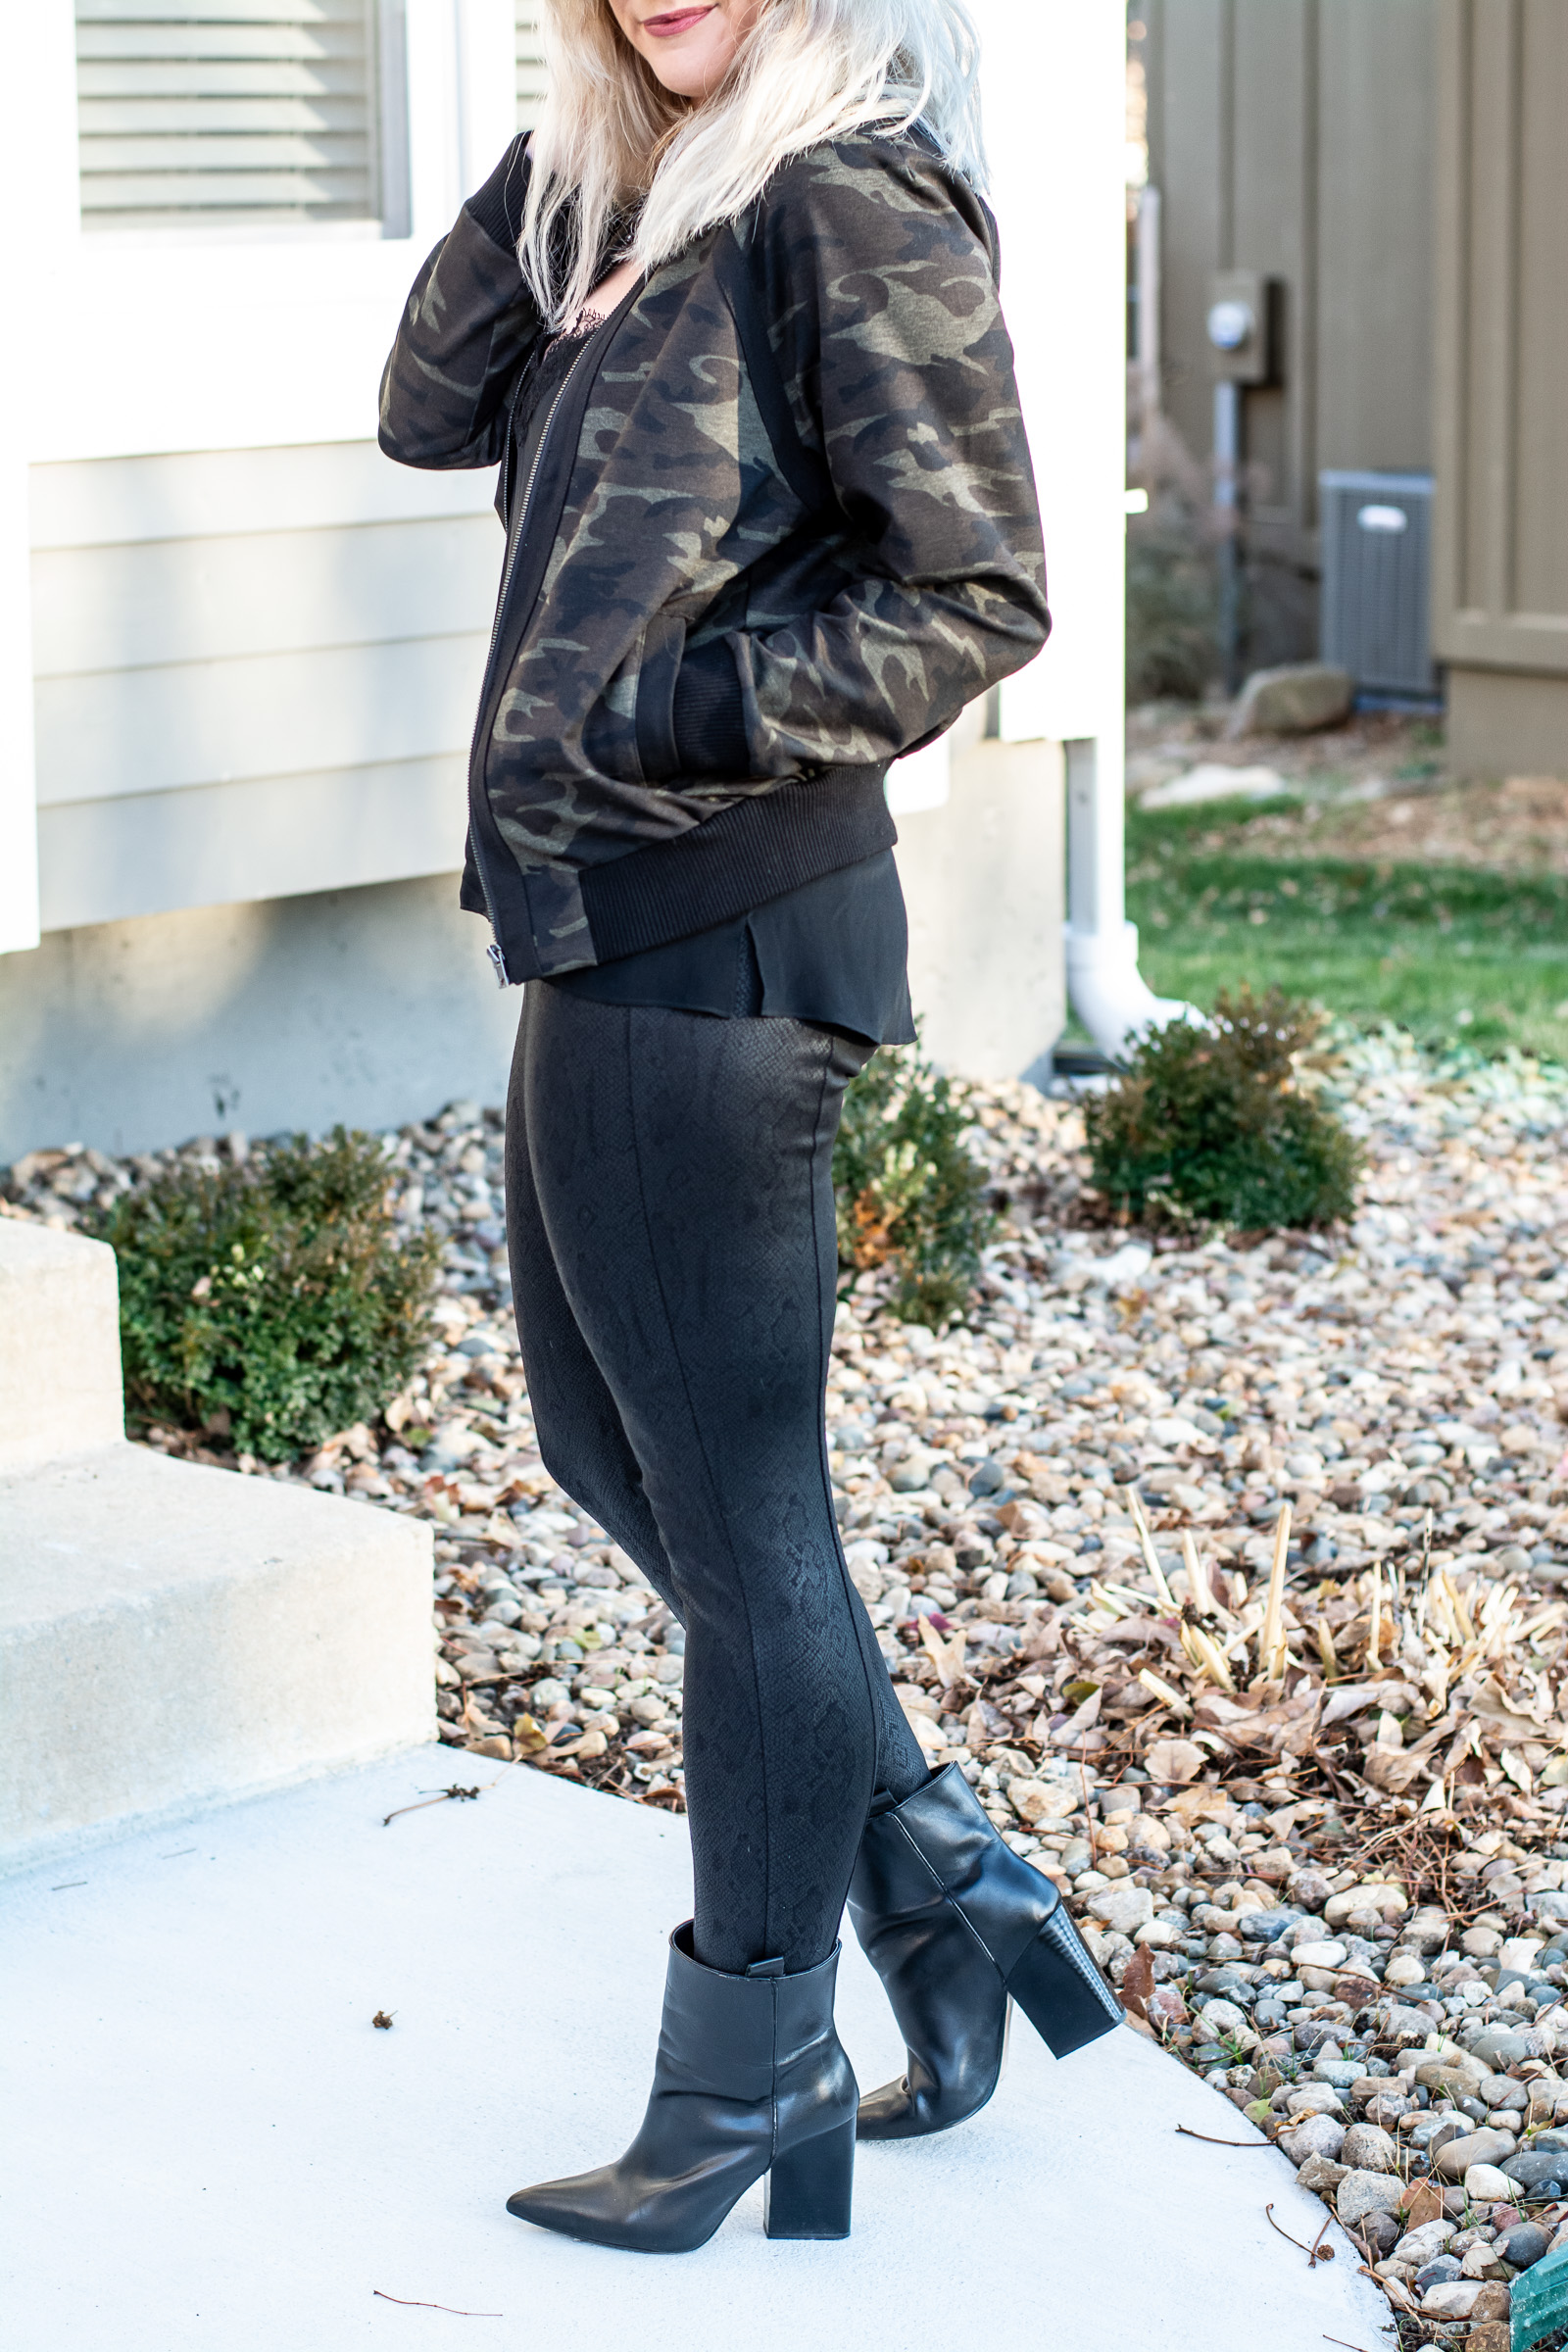 Winter Outfit: Camo Jacket and Snakeskin Leggings. | LSR